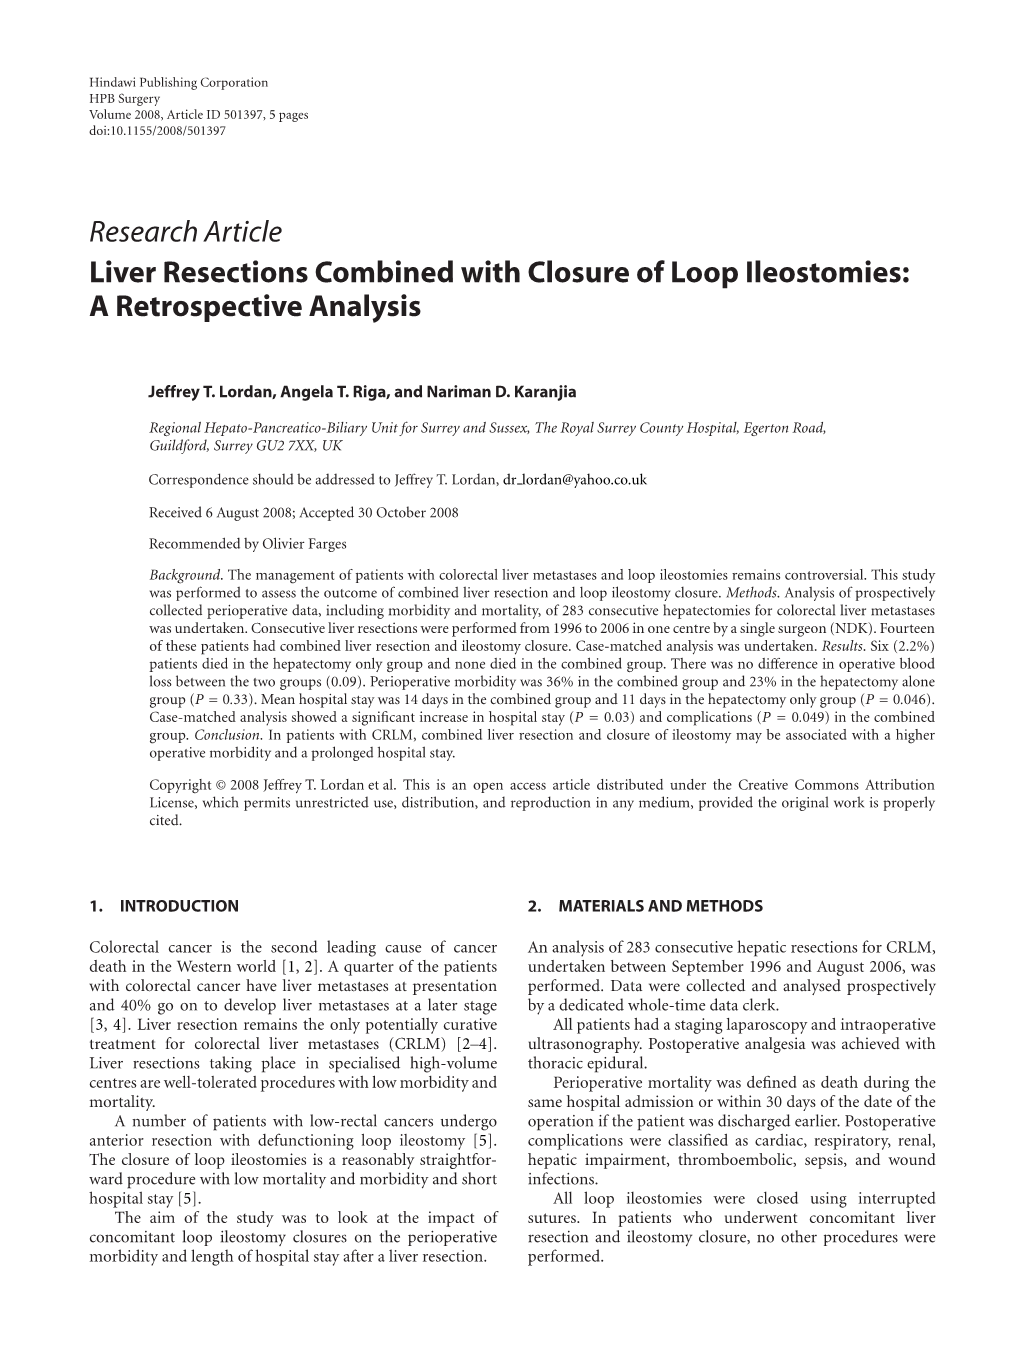 Liver Resections Combined with Closure of Loop Ileostomies: a Retrospective Analysis